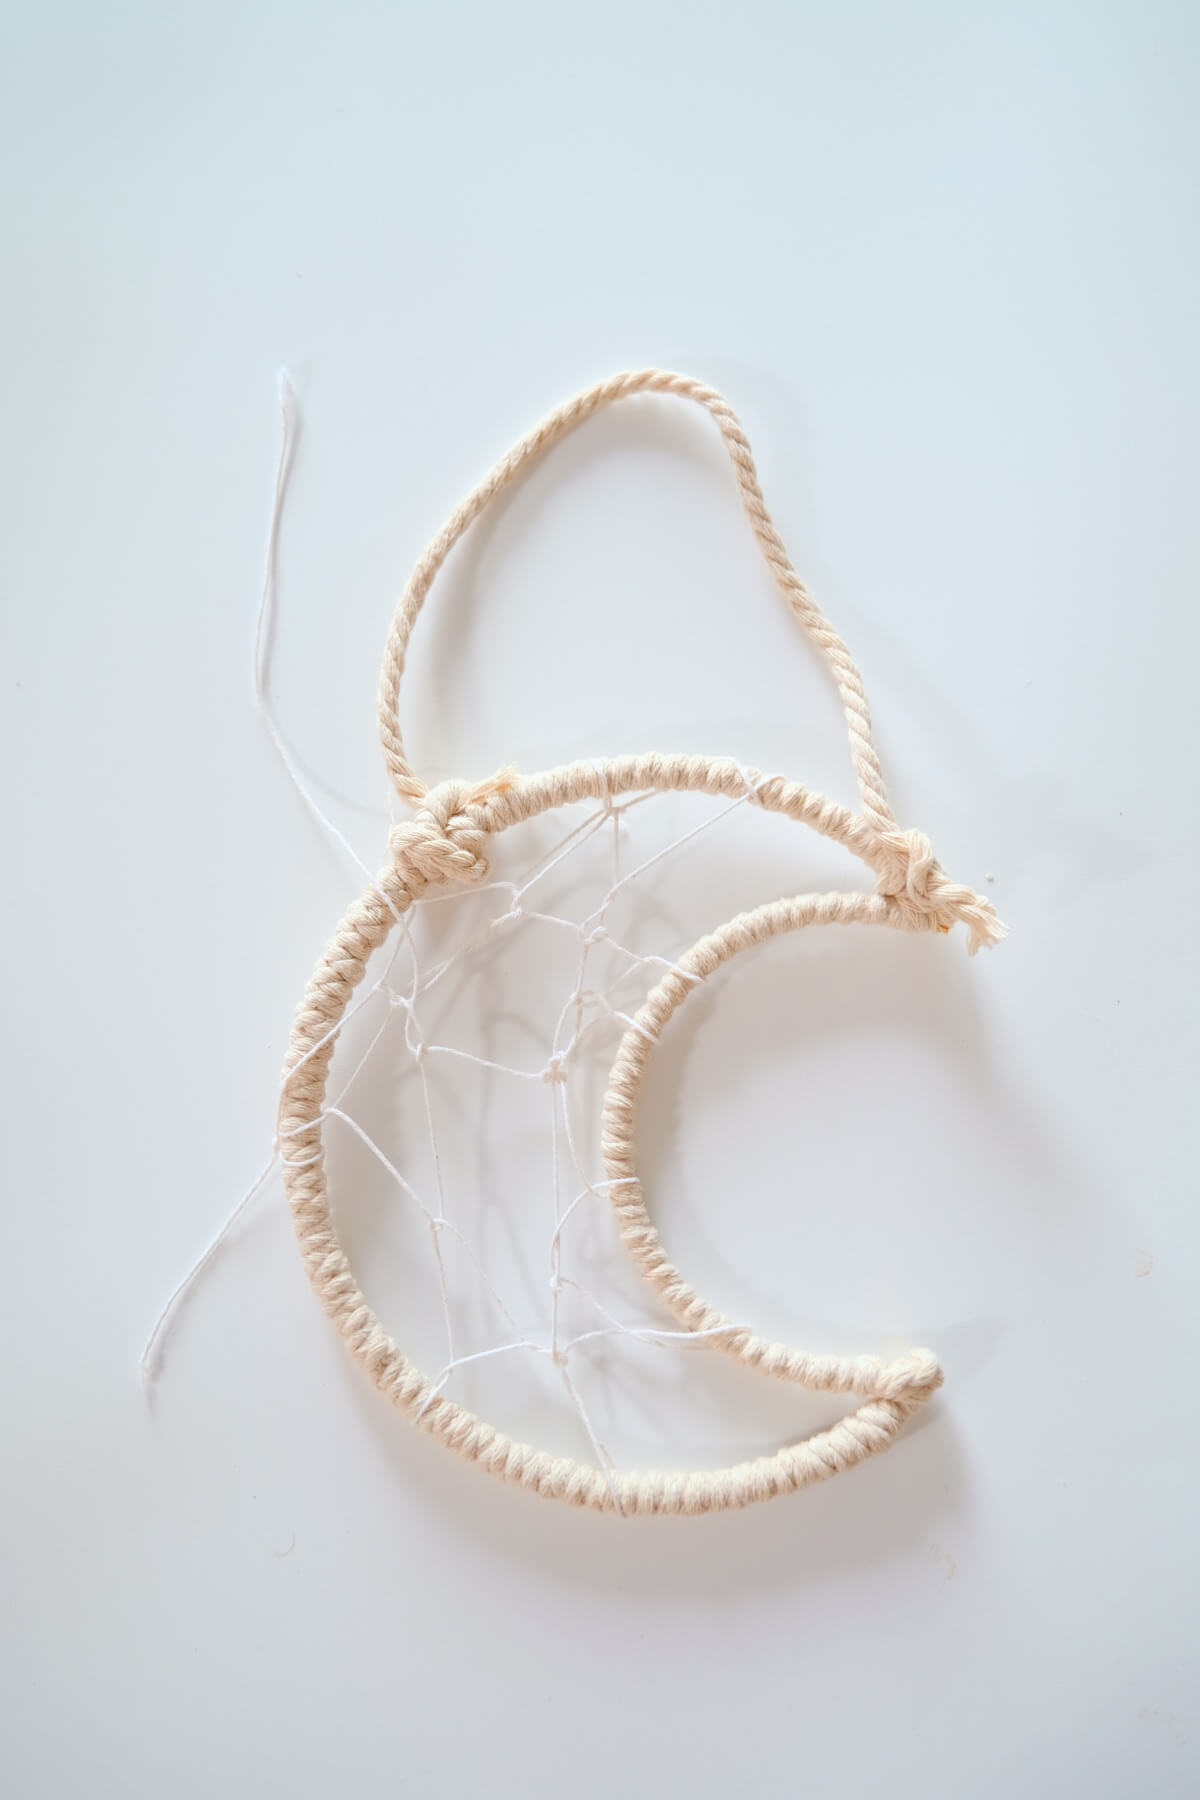 wrap the interior of the macrame moon wall hanging